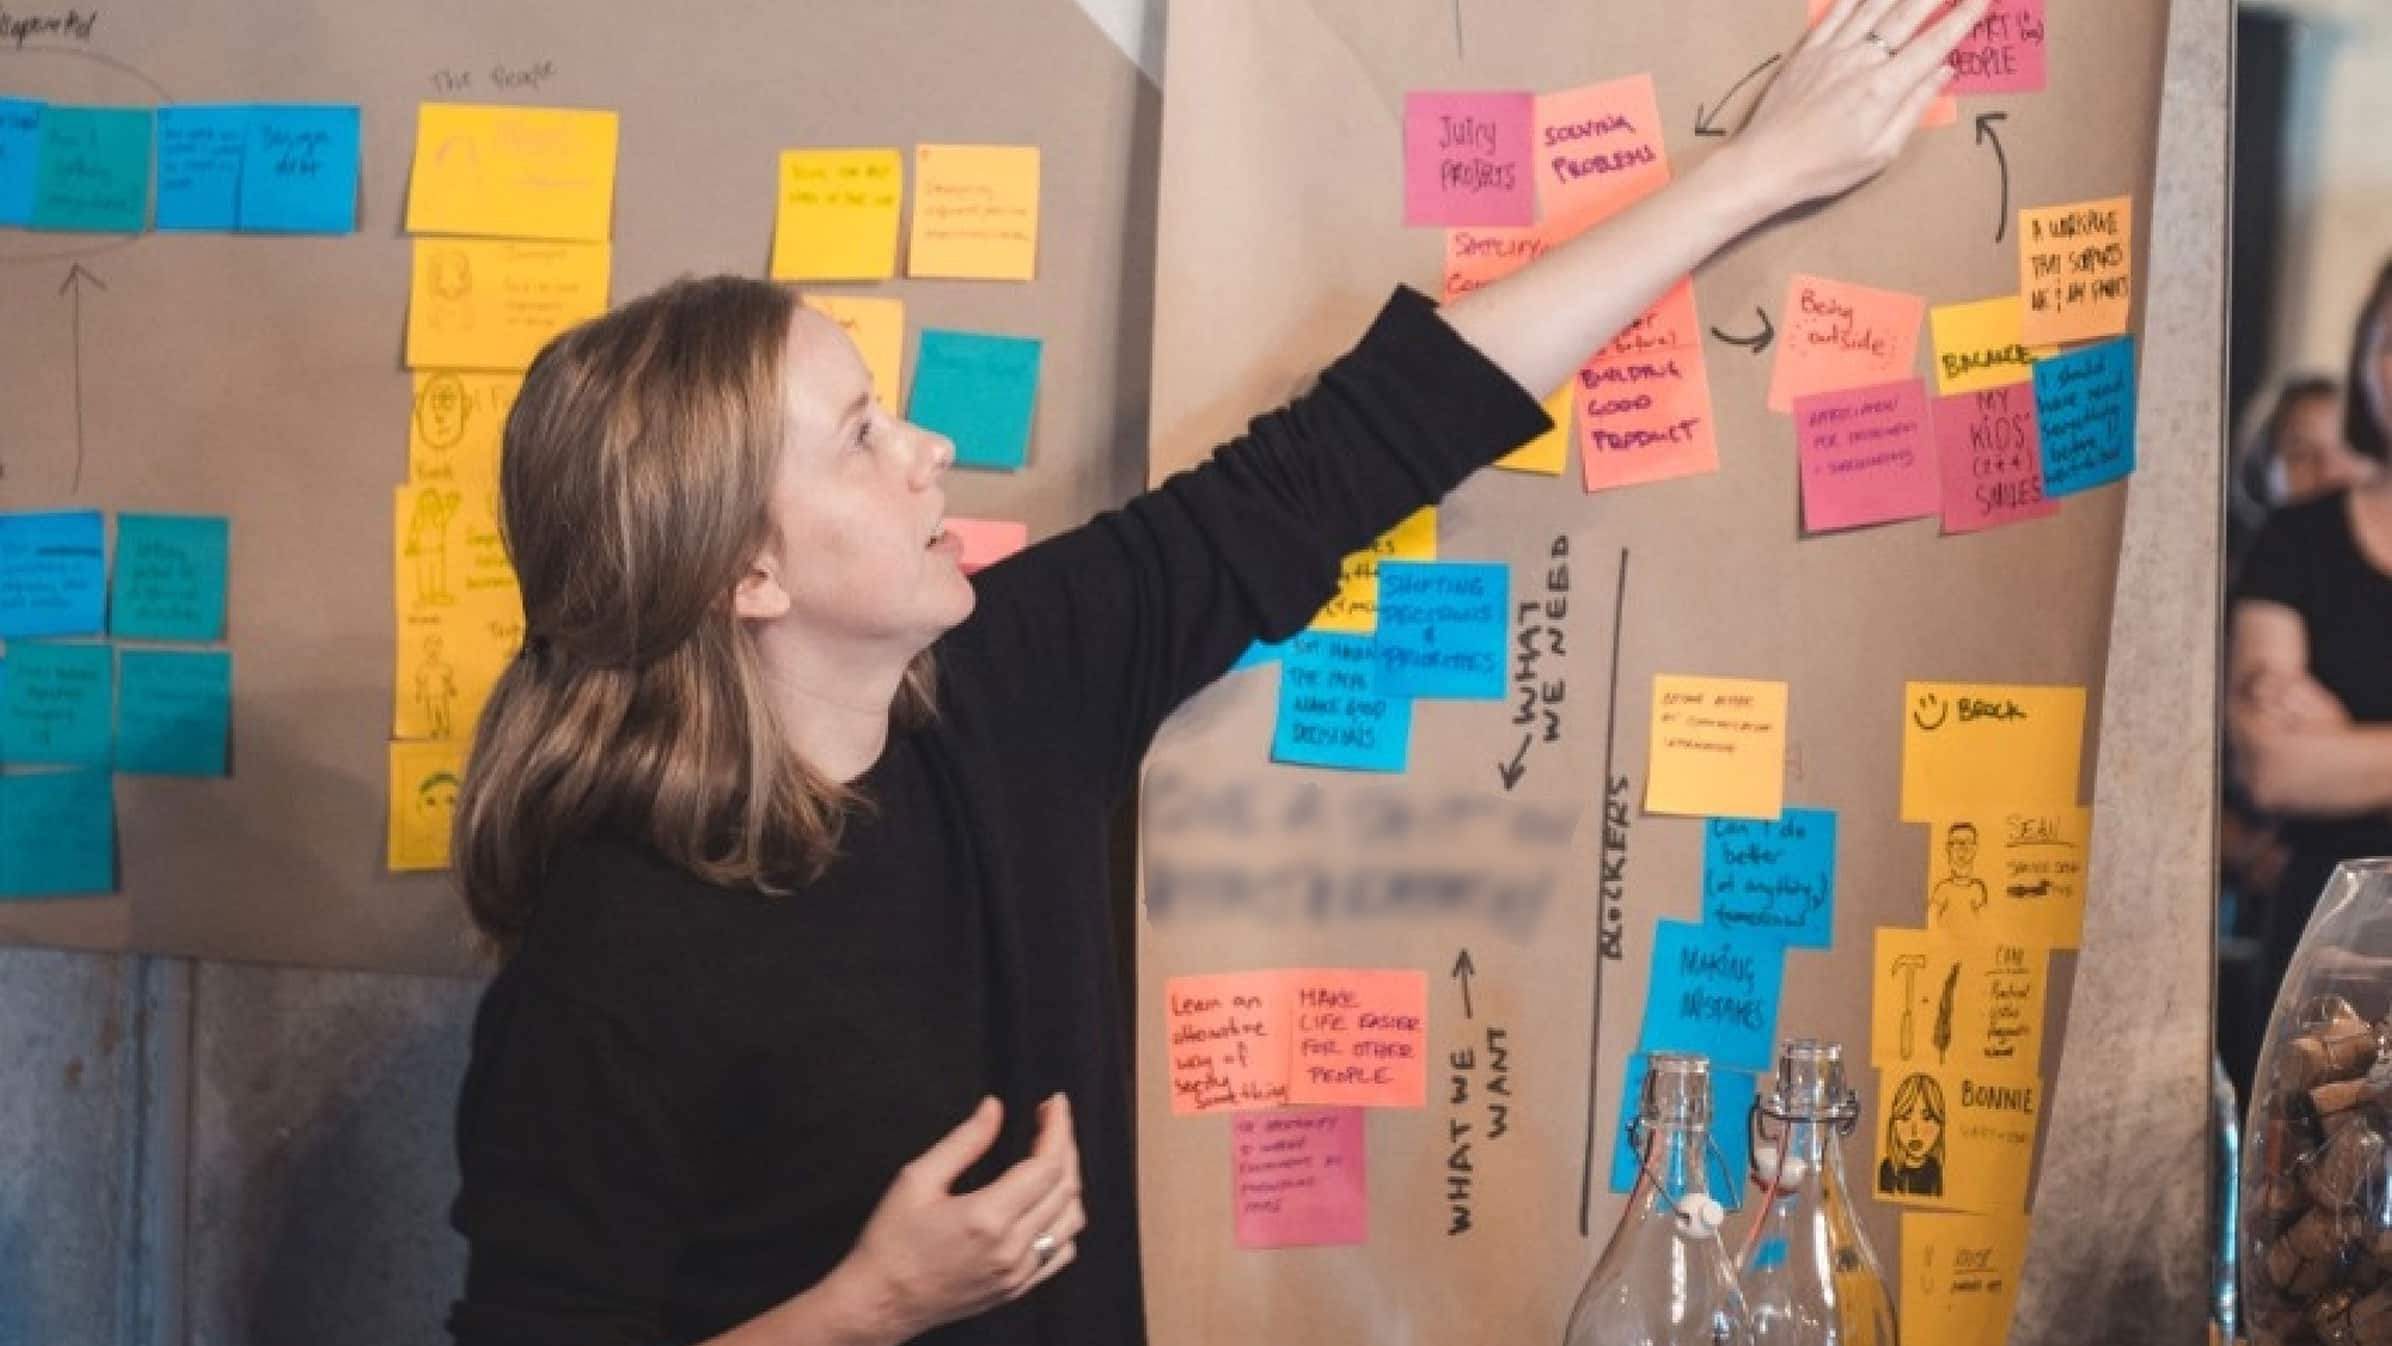 A design researcher reads one of the many coloured Post-it notes stuck onto a brown kraft paper.